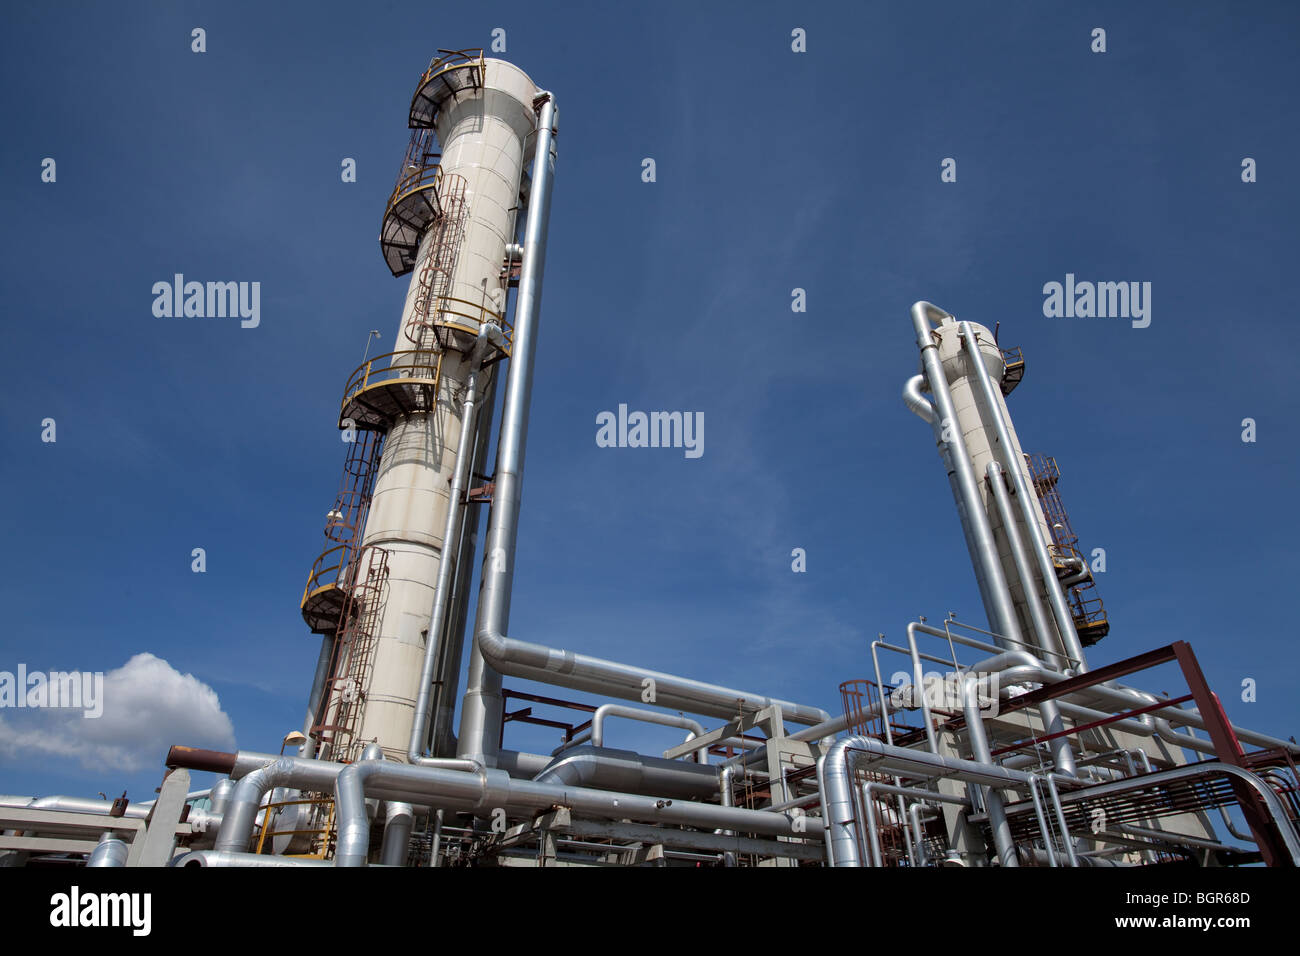 Piping in a gas compressor plant Stock Photo